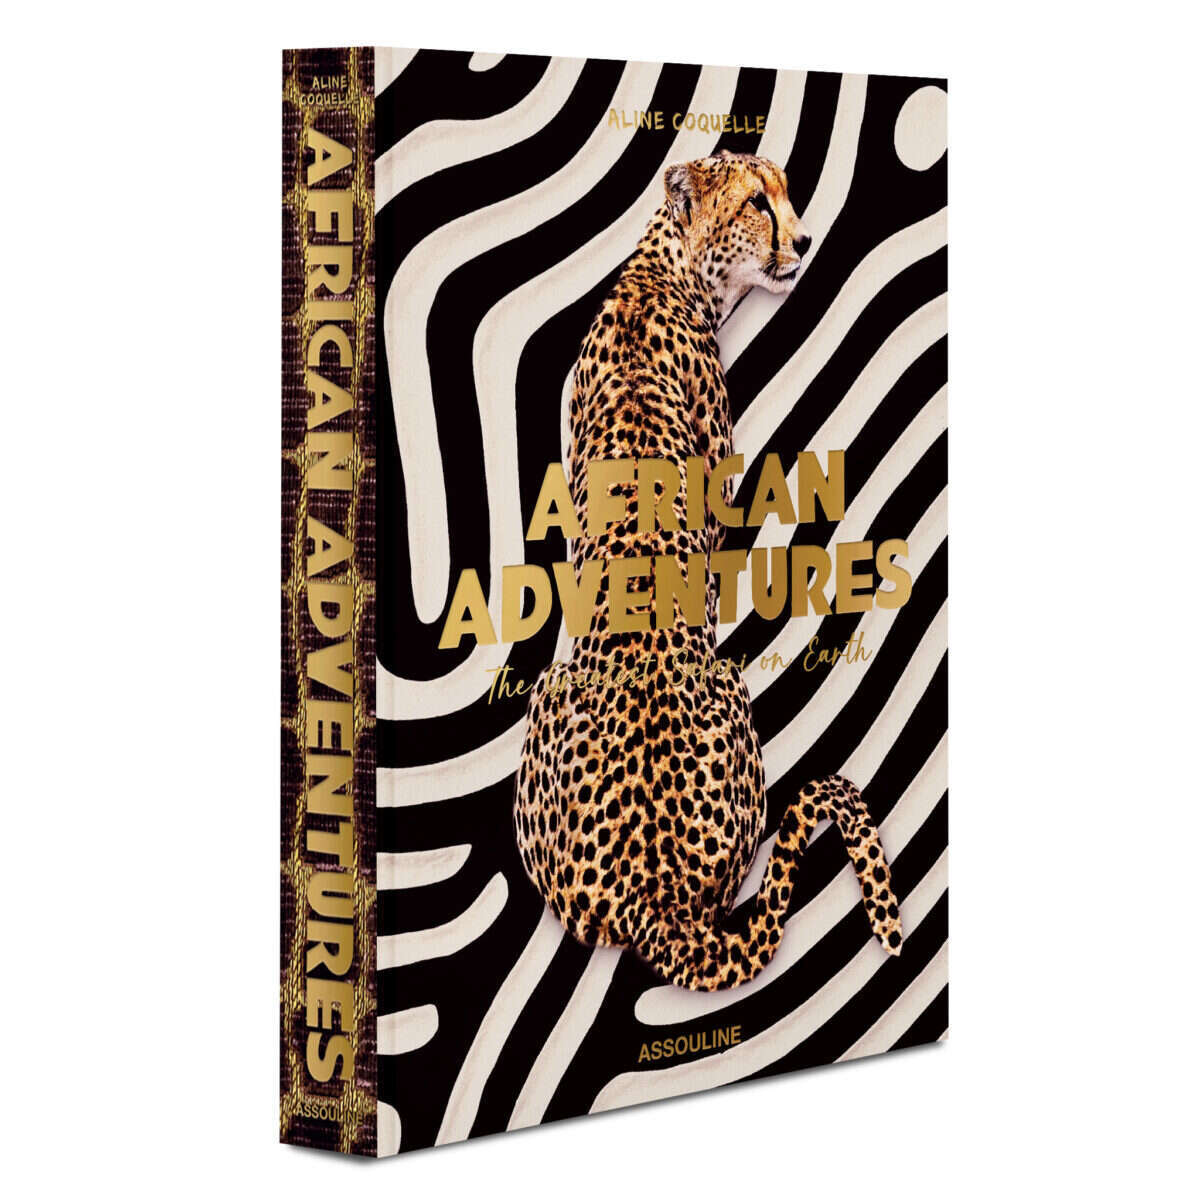 The African Adventures Assouline book cover 